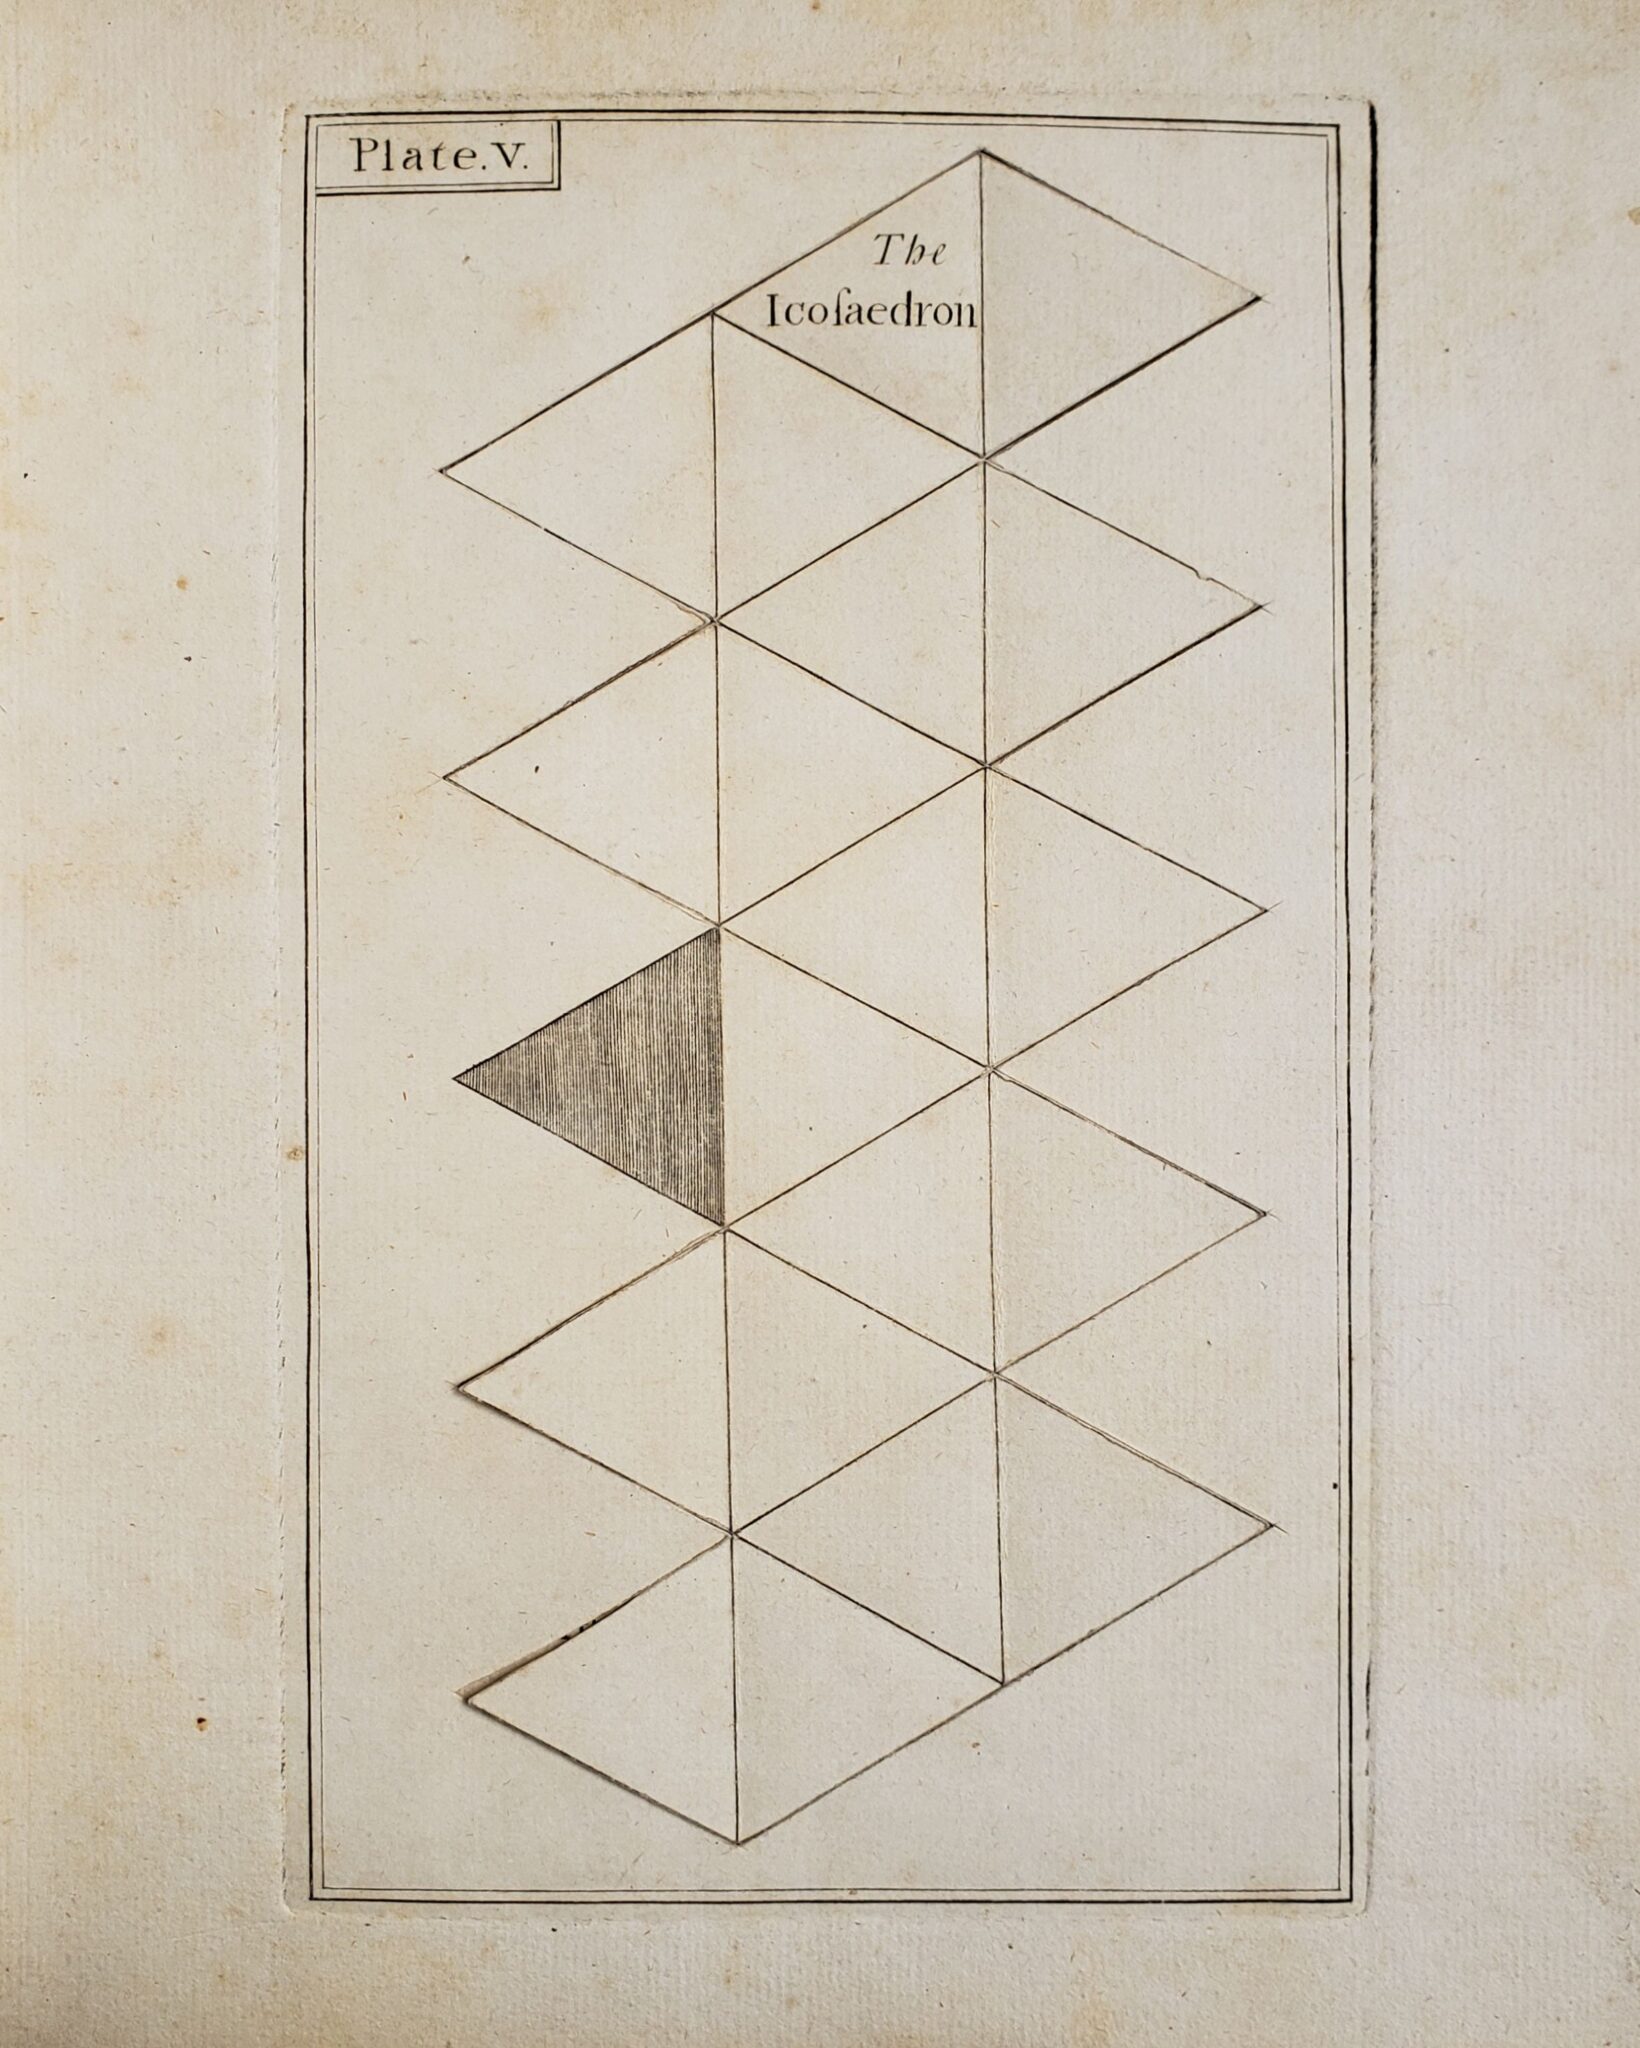 Plate 5 from John Lodge Cowley's "An Appendix to Euclid's Elements"